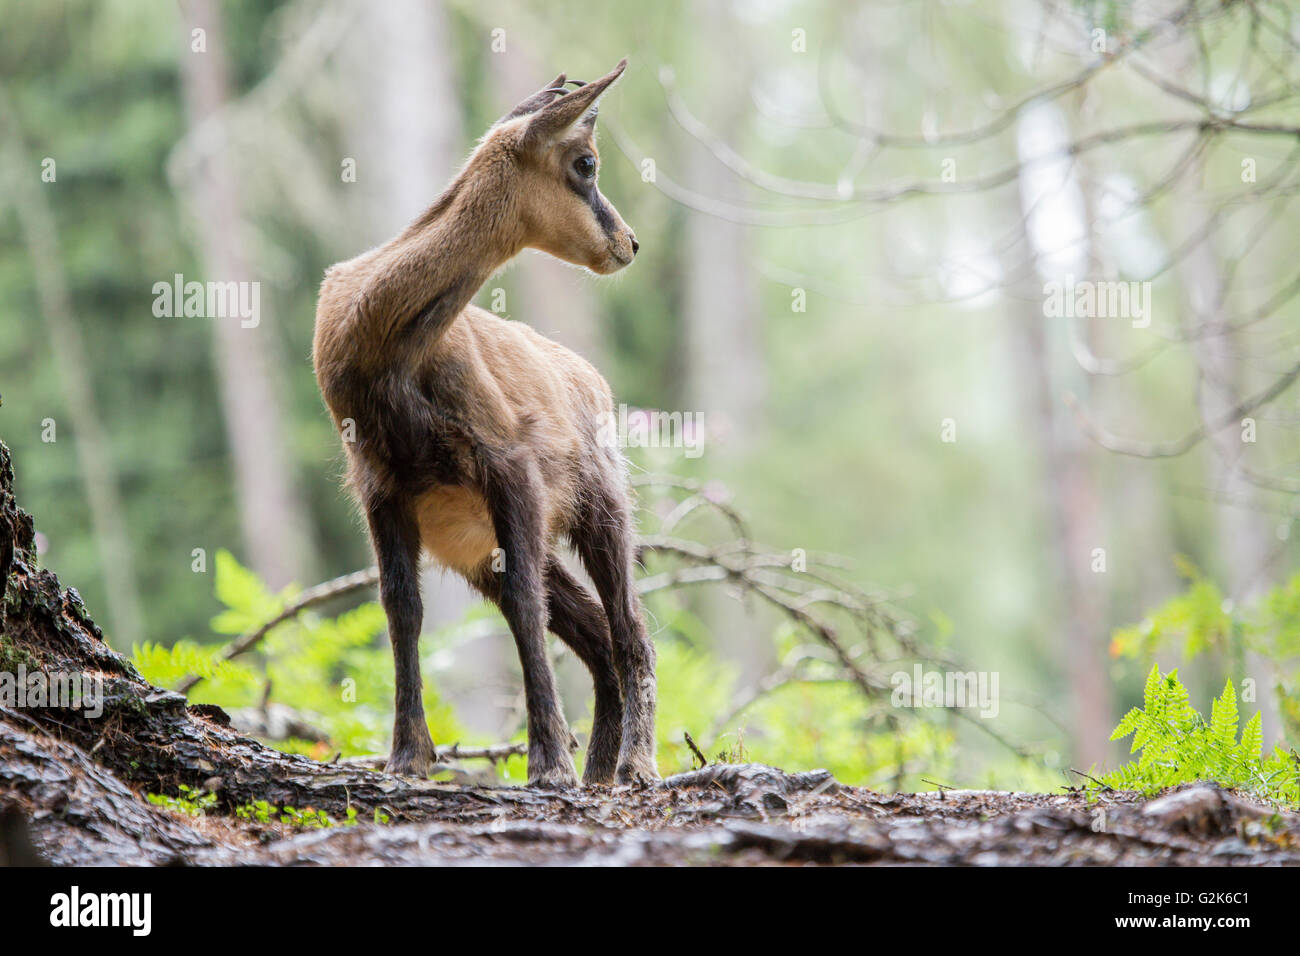 A chamois, Rupicapra spp, standing in a wood looking around Stock Photo